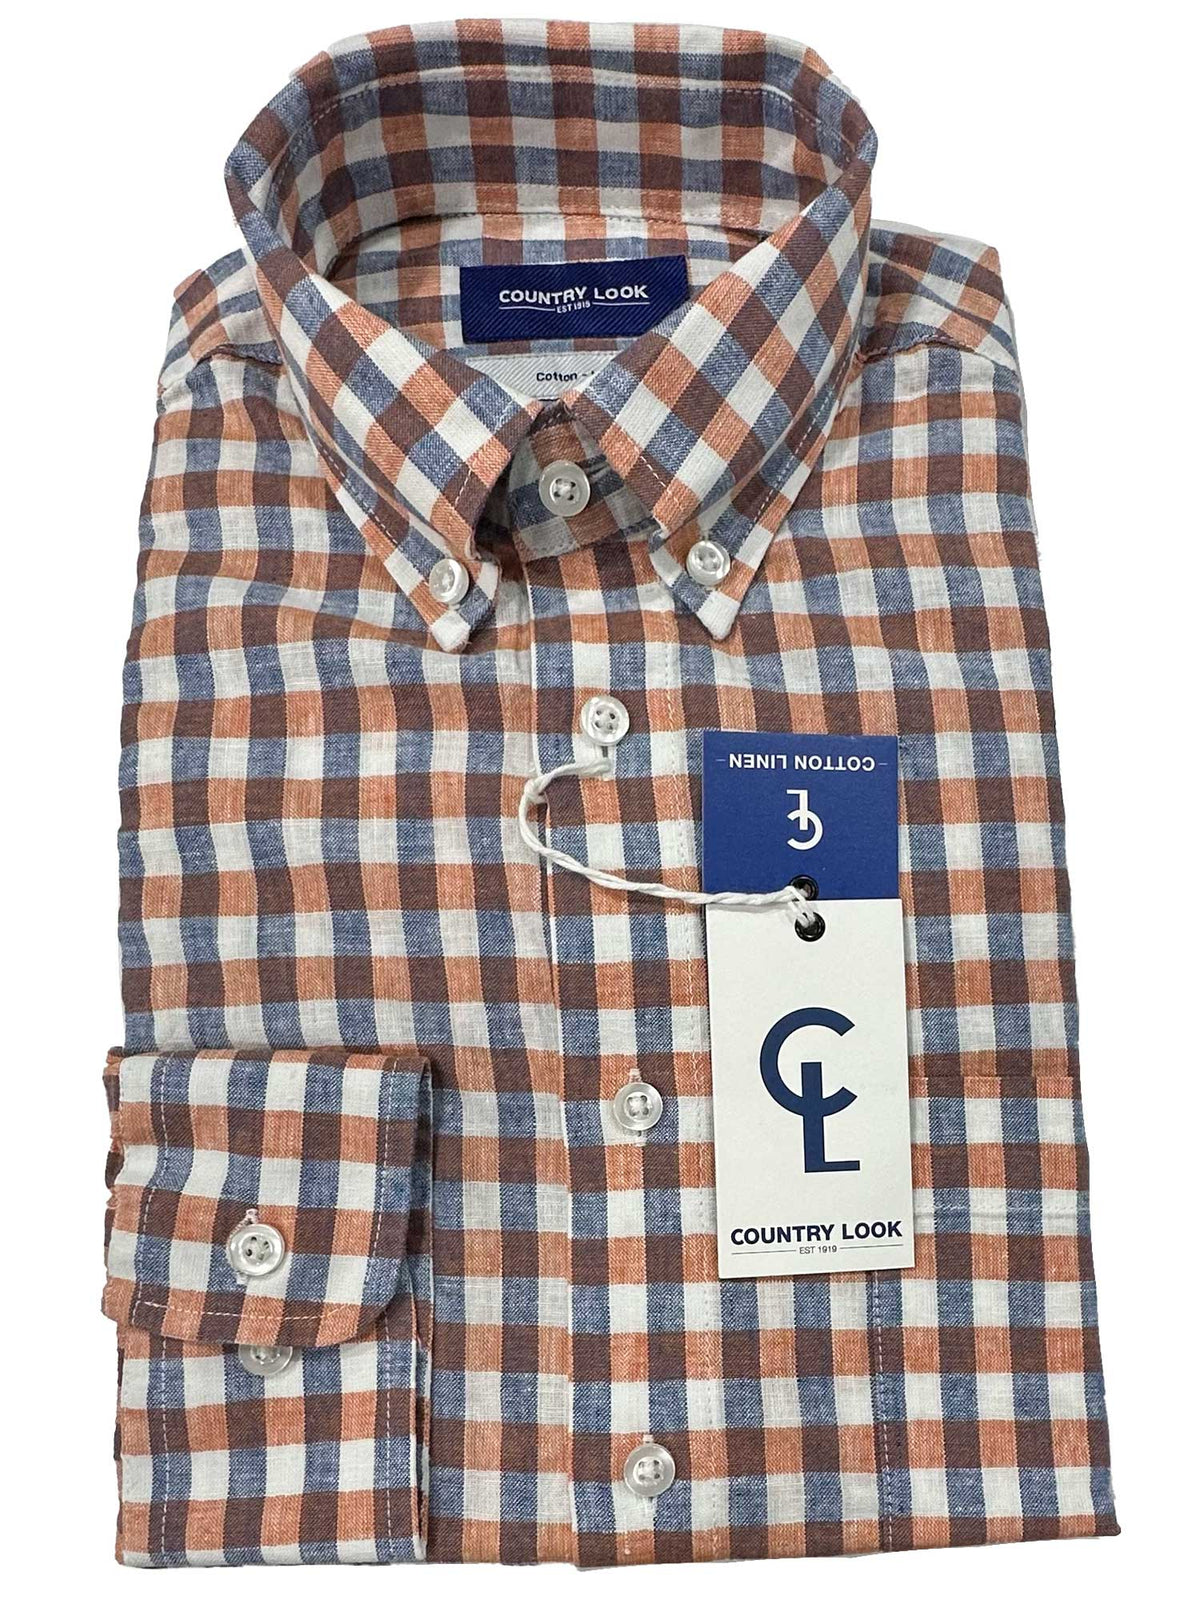 Galway Shirt-FYQ139  https://harrysformenswear.com.au/products/galway-shirt-fyq139  Comfortable Galway Shirt-FYQ144. Cotton and linen blend for a cool, natural style. Machine-washable, functional front pocket. Modern fit.